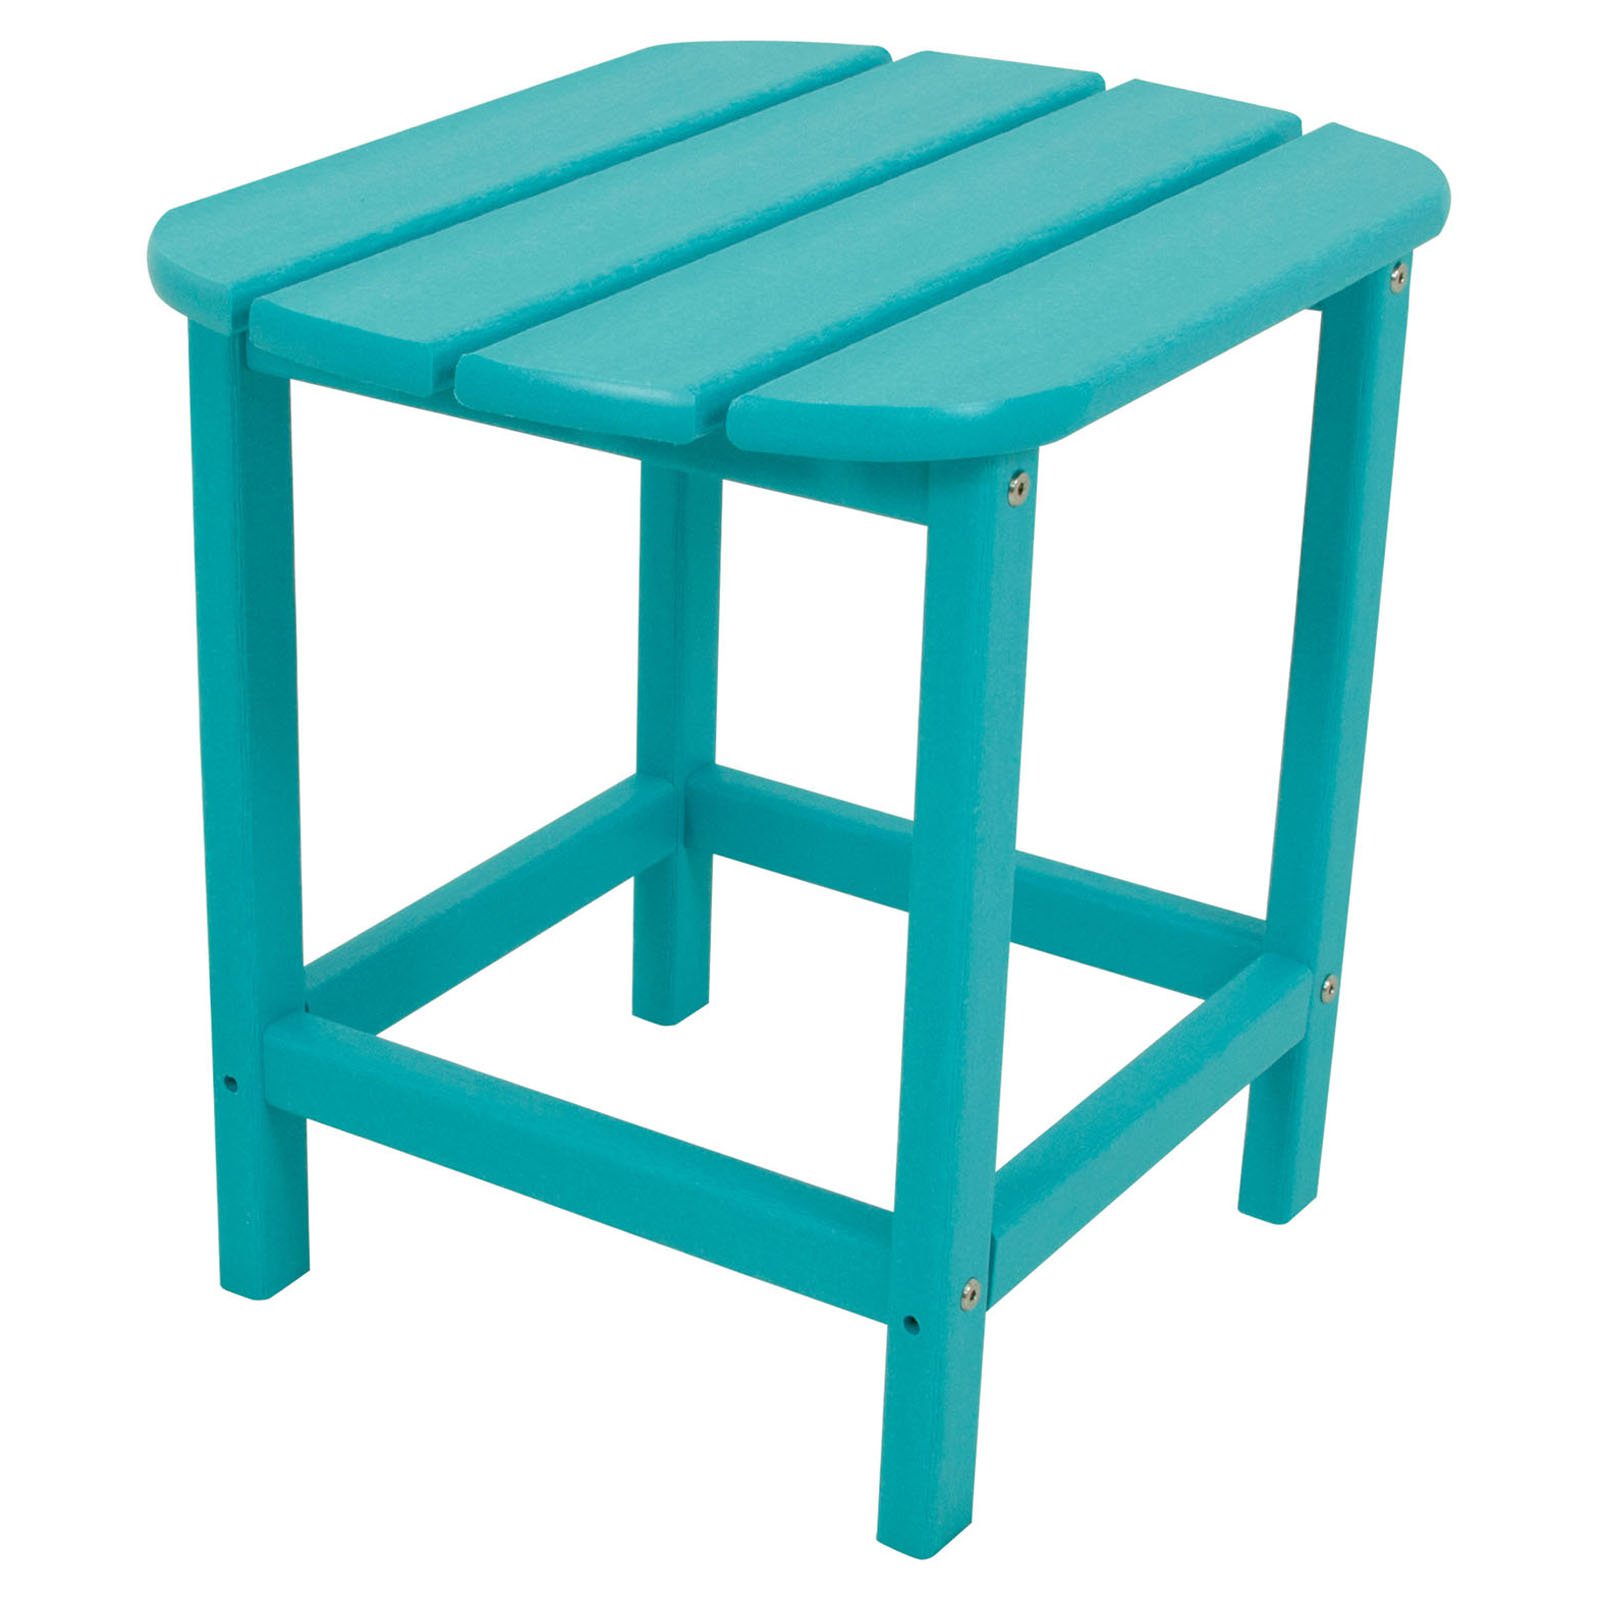 Hanover Outdoor All-Weather Side Table - image 1 of 11